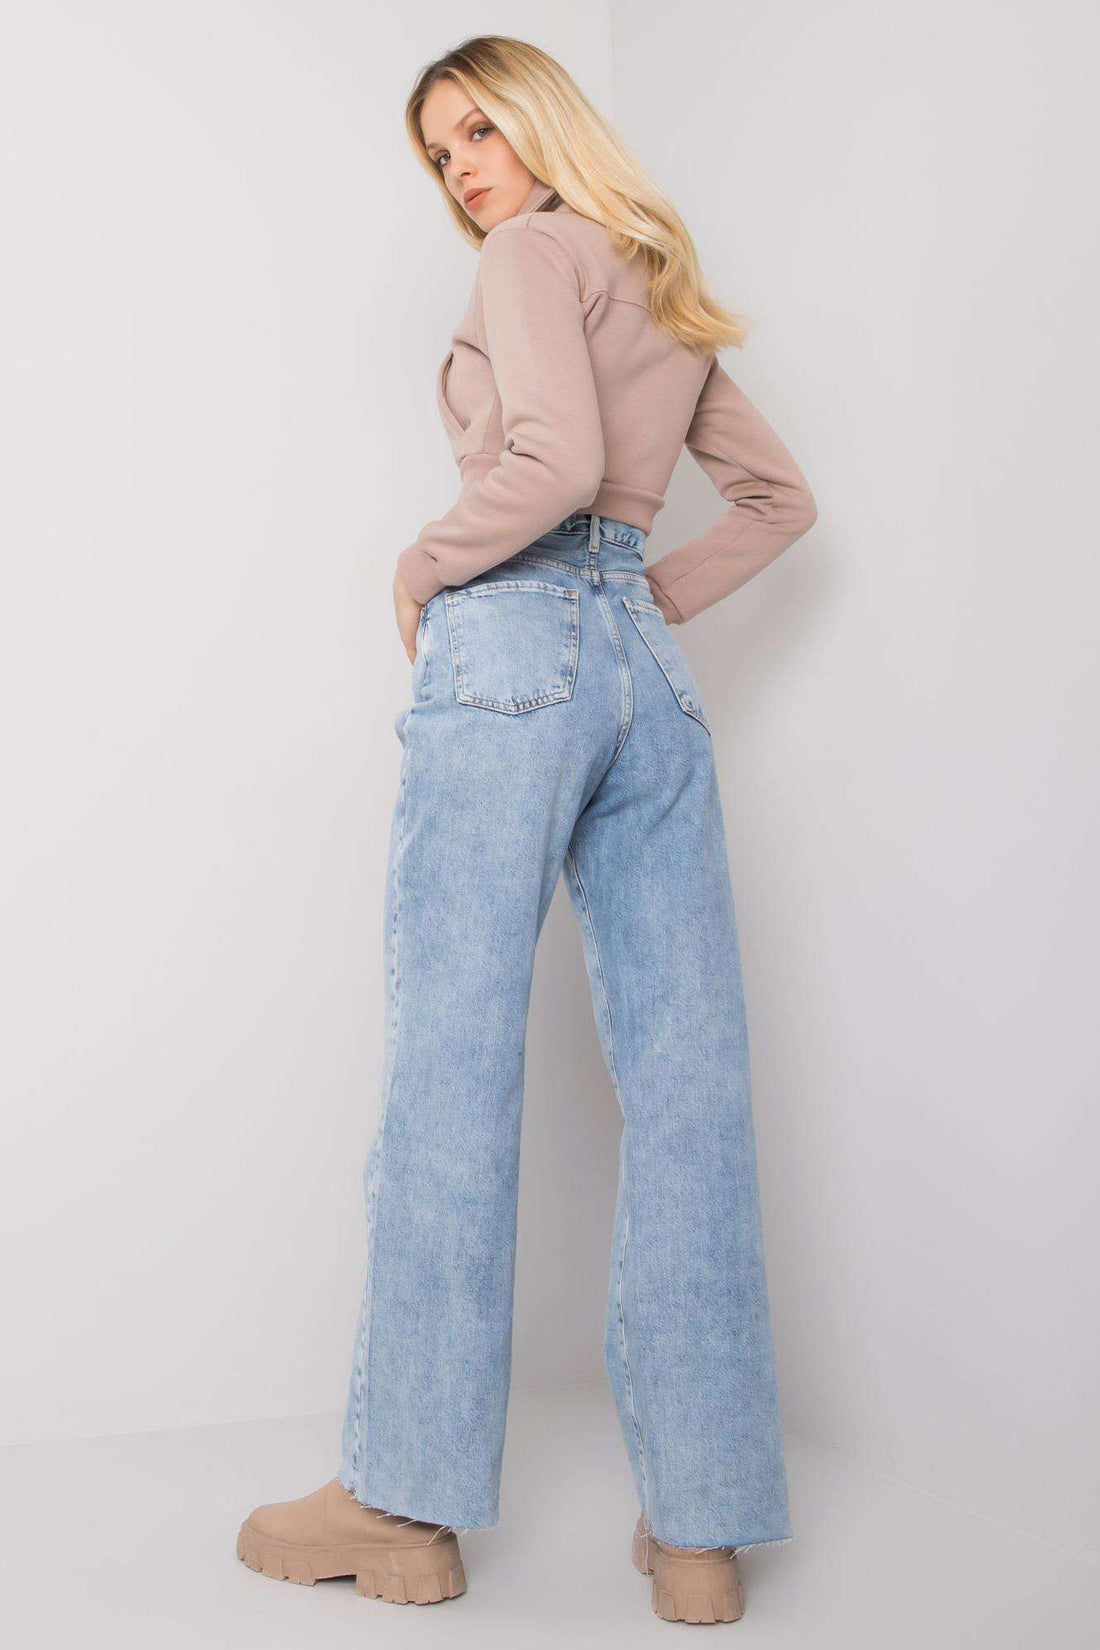 Discover comfort and trendy urban style with our High-Waisted Light Blue Straight Jeans. Made from 100% cotton, these jeans offer all-day comfort and feature a neutral cut, perfect for everyday city outings. Elevate your casual wardrobe with this versatile choice.